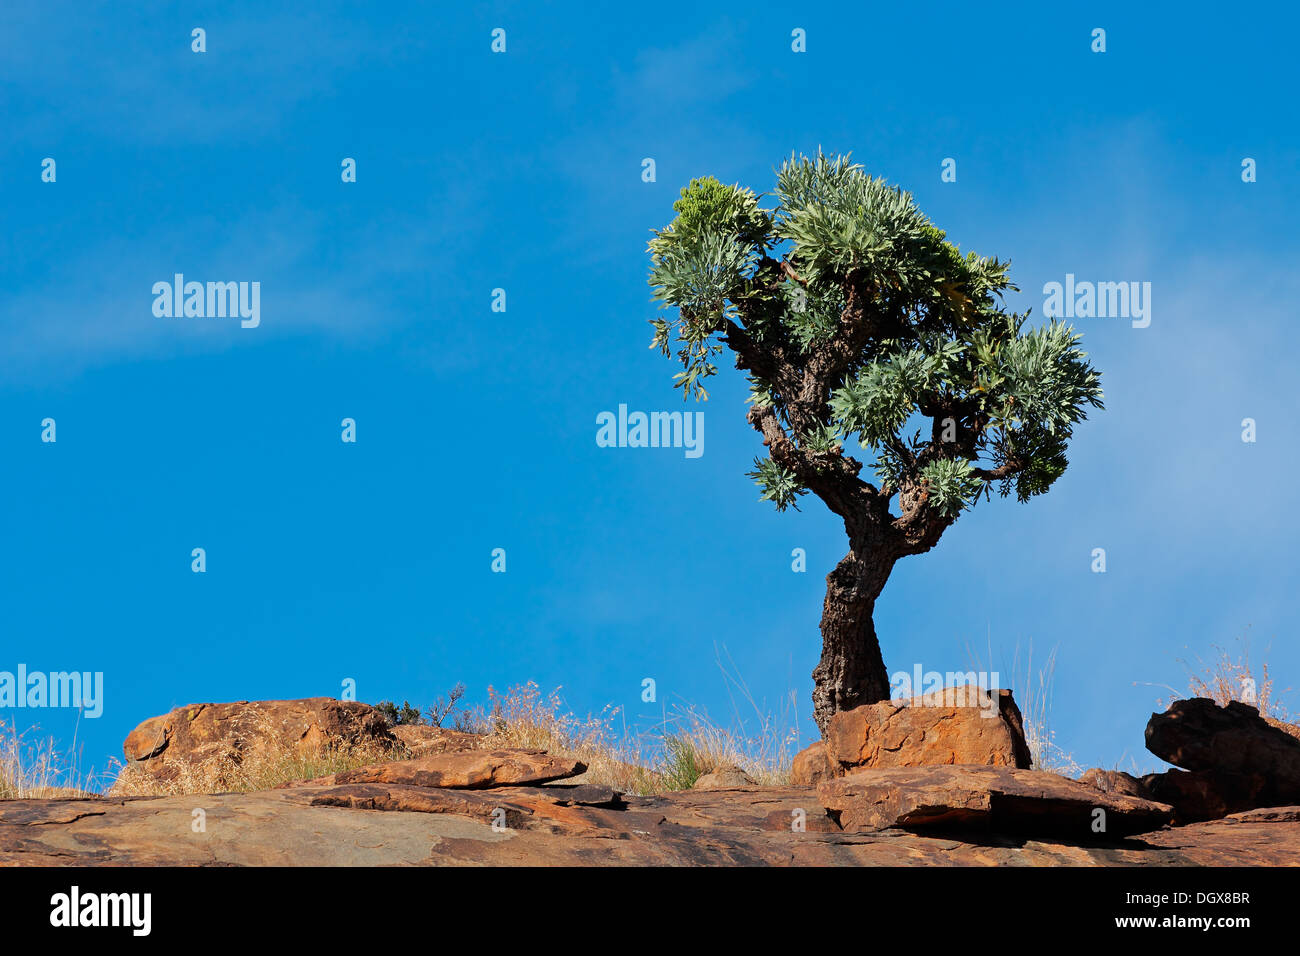 African landscape with a tree on a rocky ridge against a blue sky Stock Photo